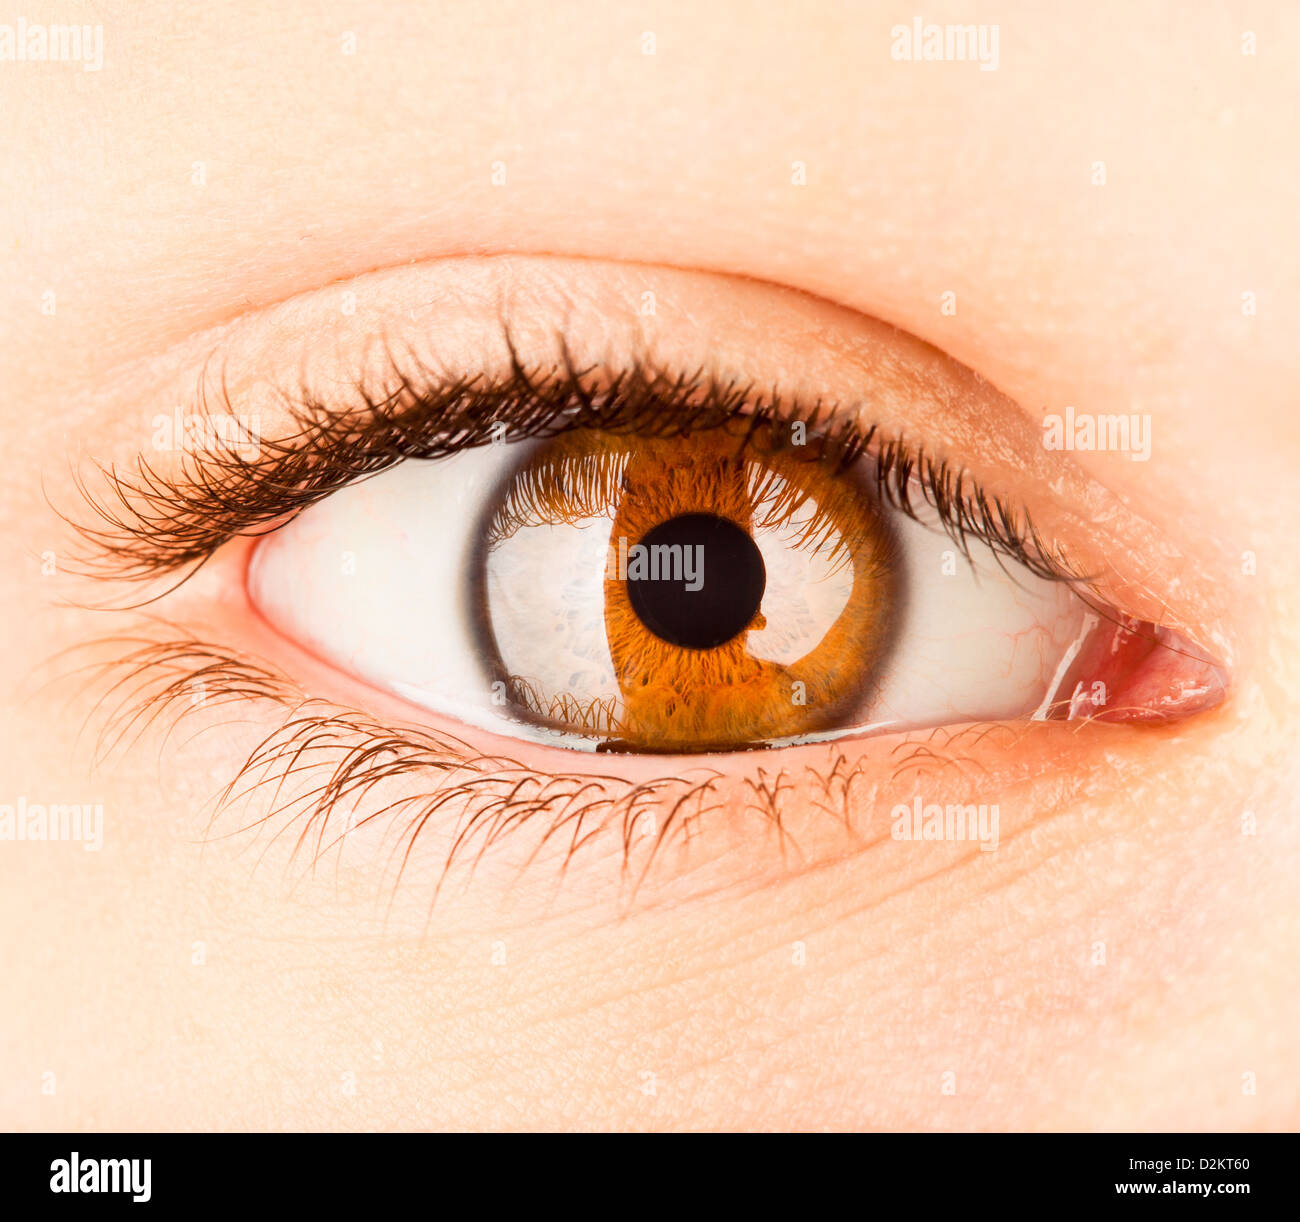 Eye of the person, a pupil photographed close up Stock Photo